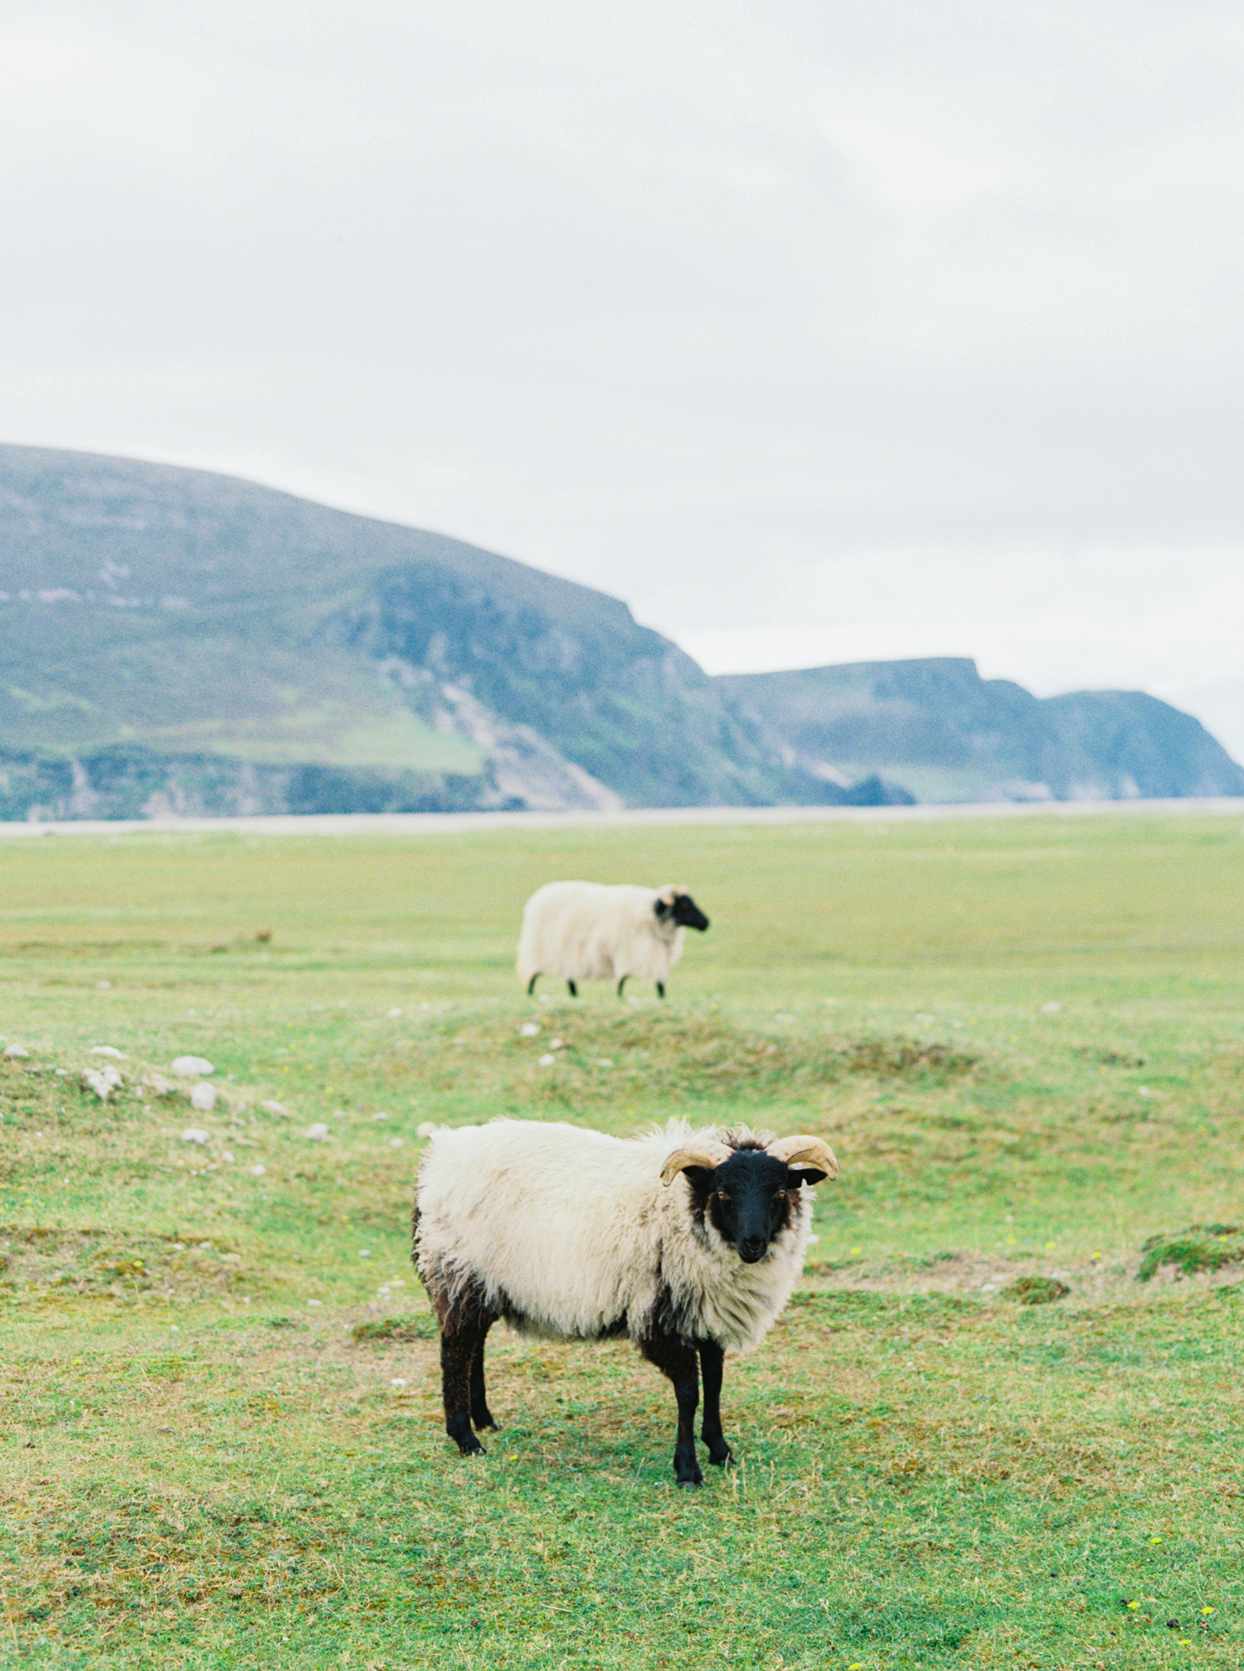 two sheep on grassy field in Ireland